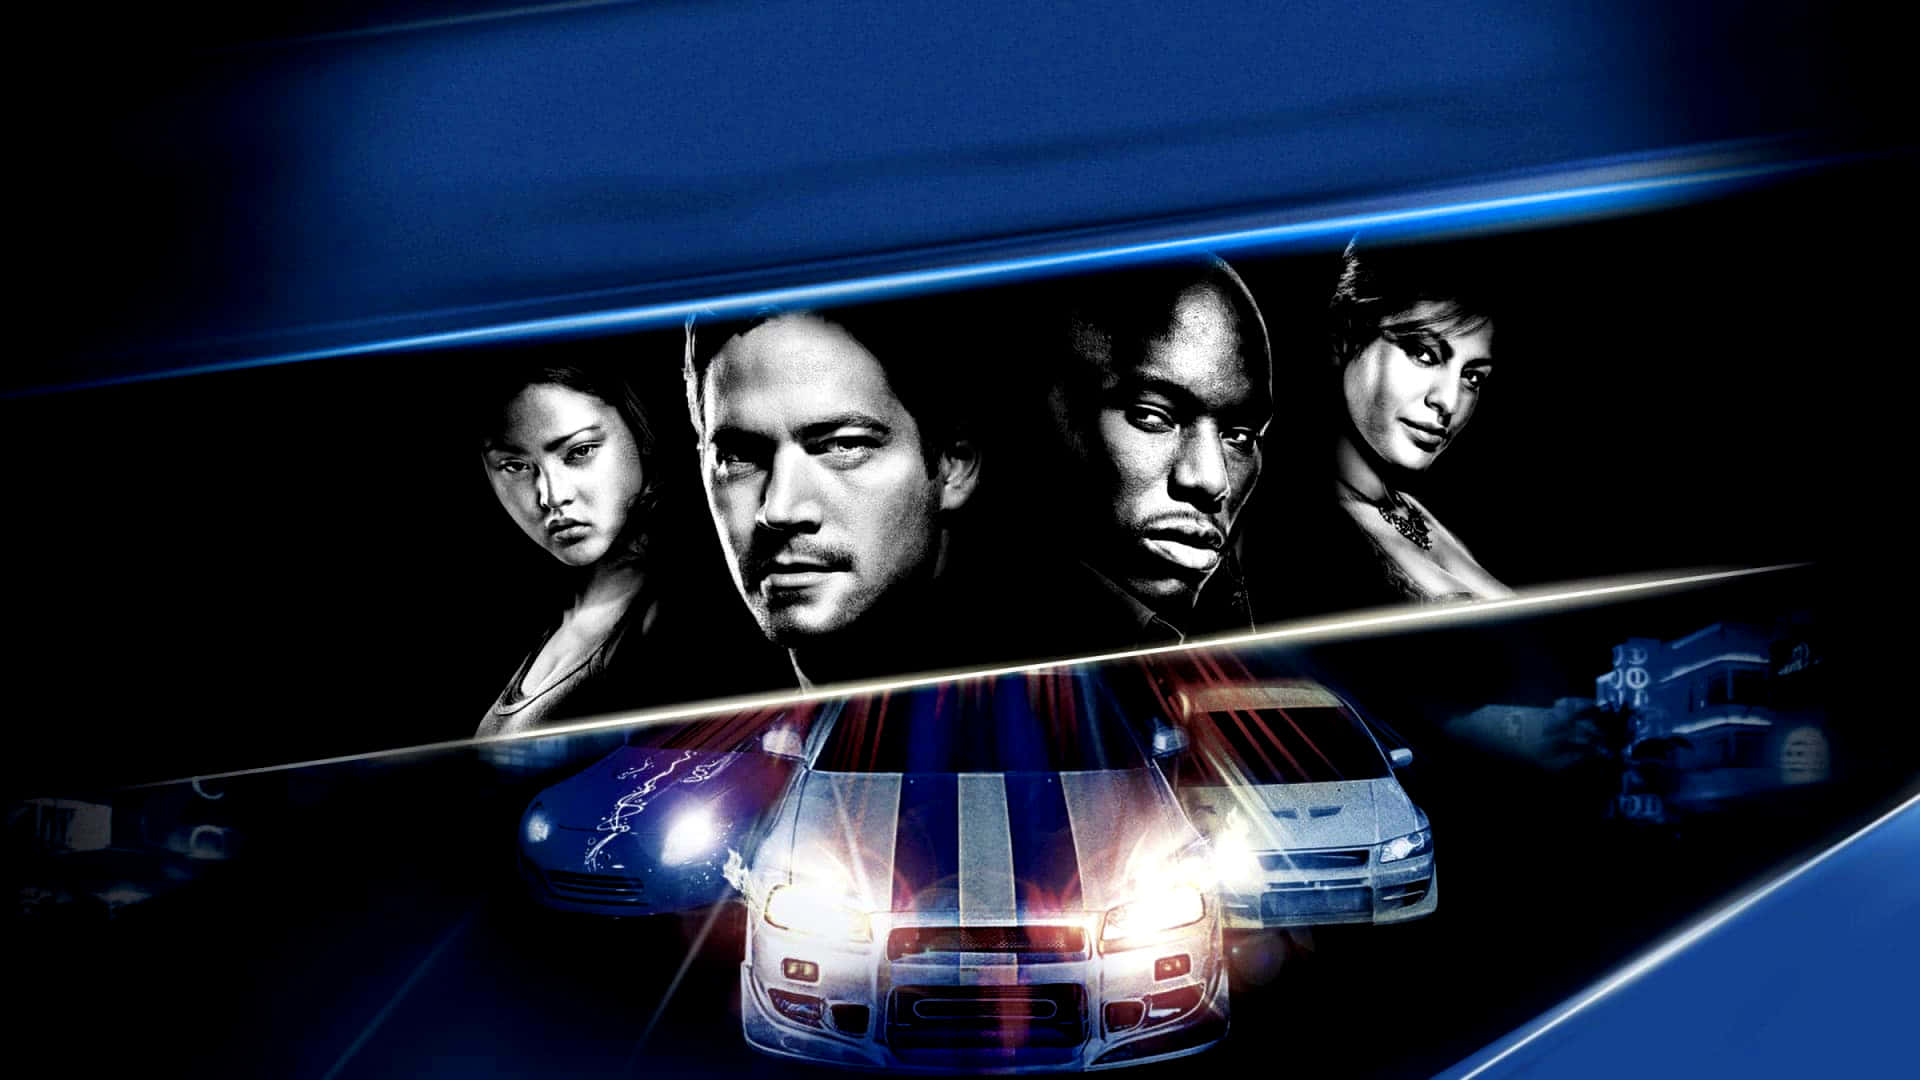 gear up for a thrill ride with HD Fast and Furious